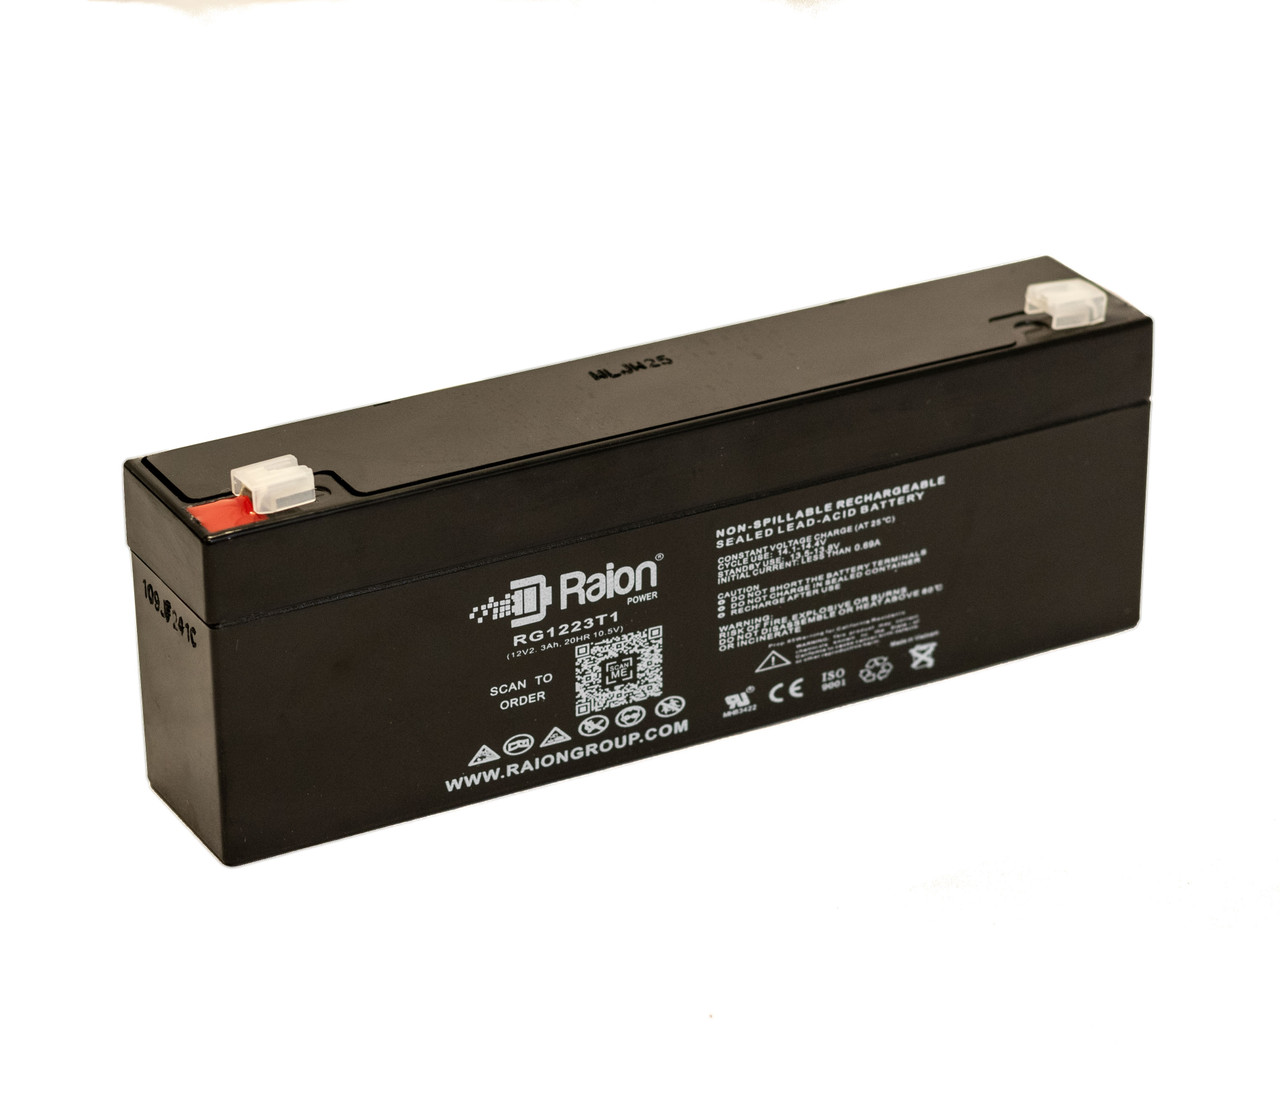 Raion Power RG1223T1 Replacement Battery for Zimmer Medical ATS 1200